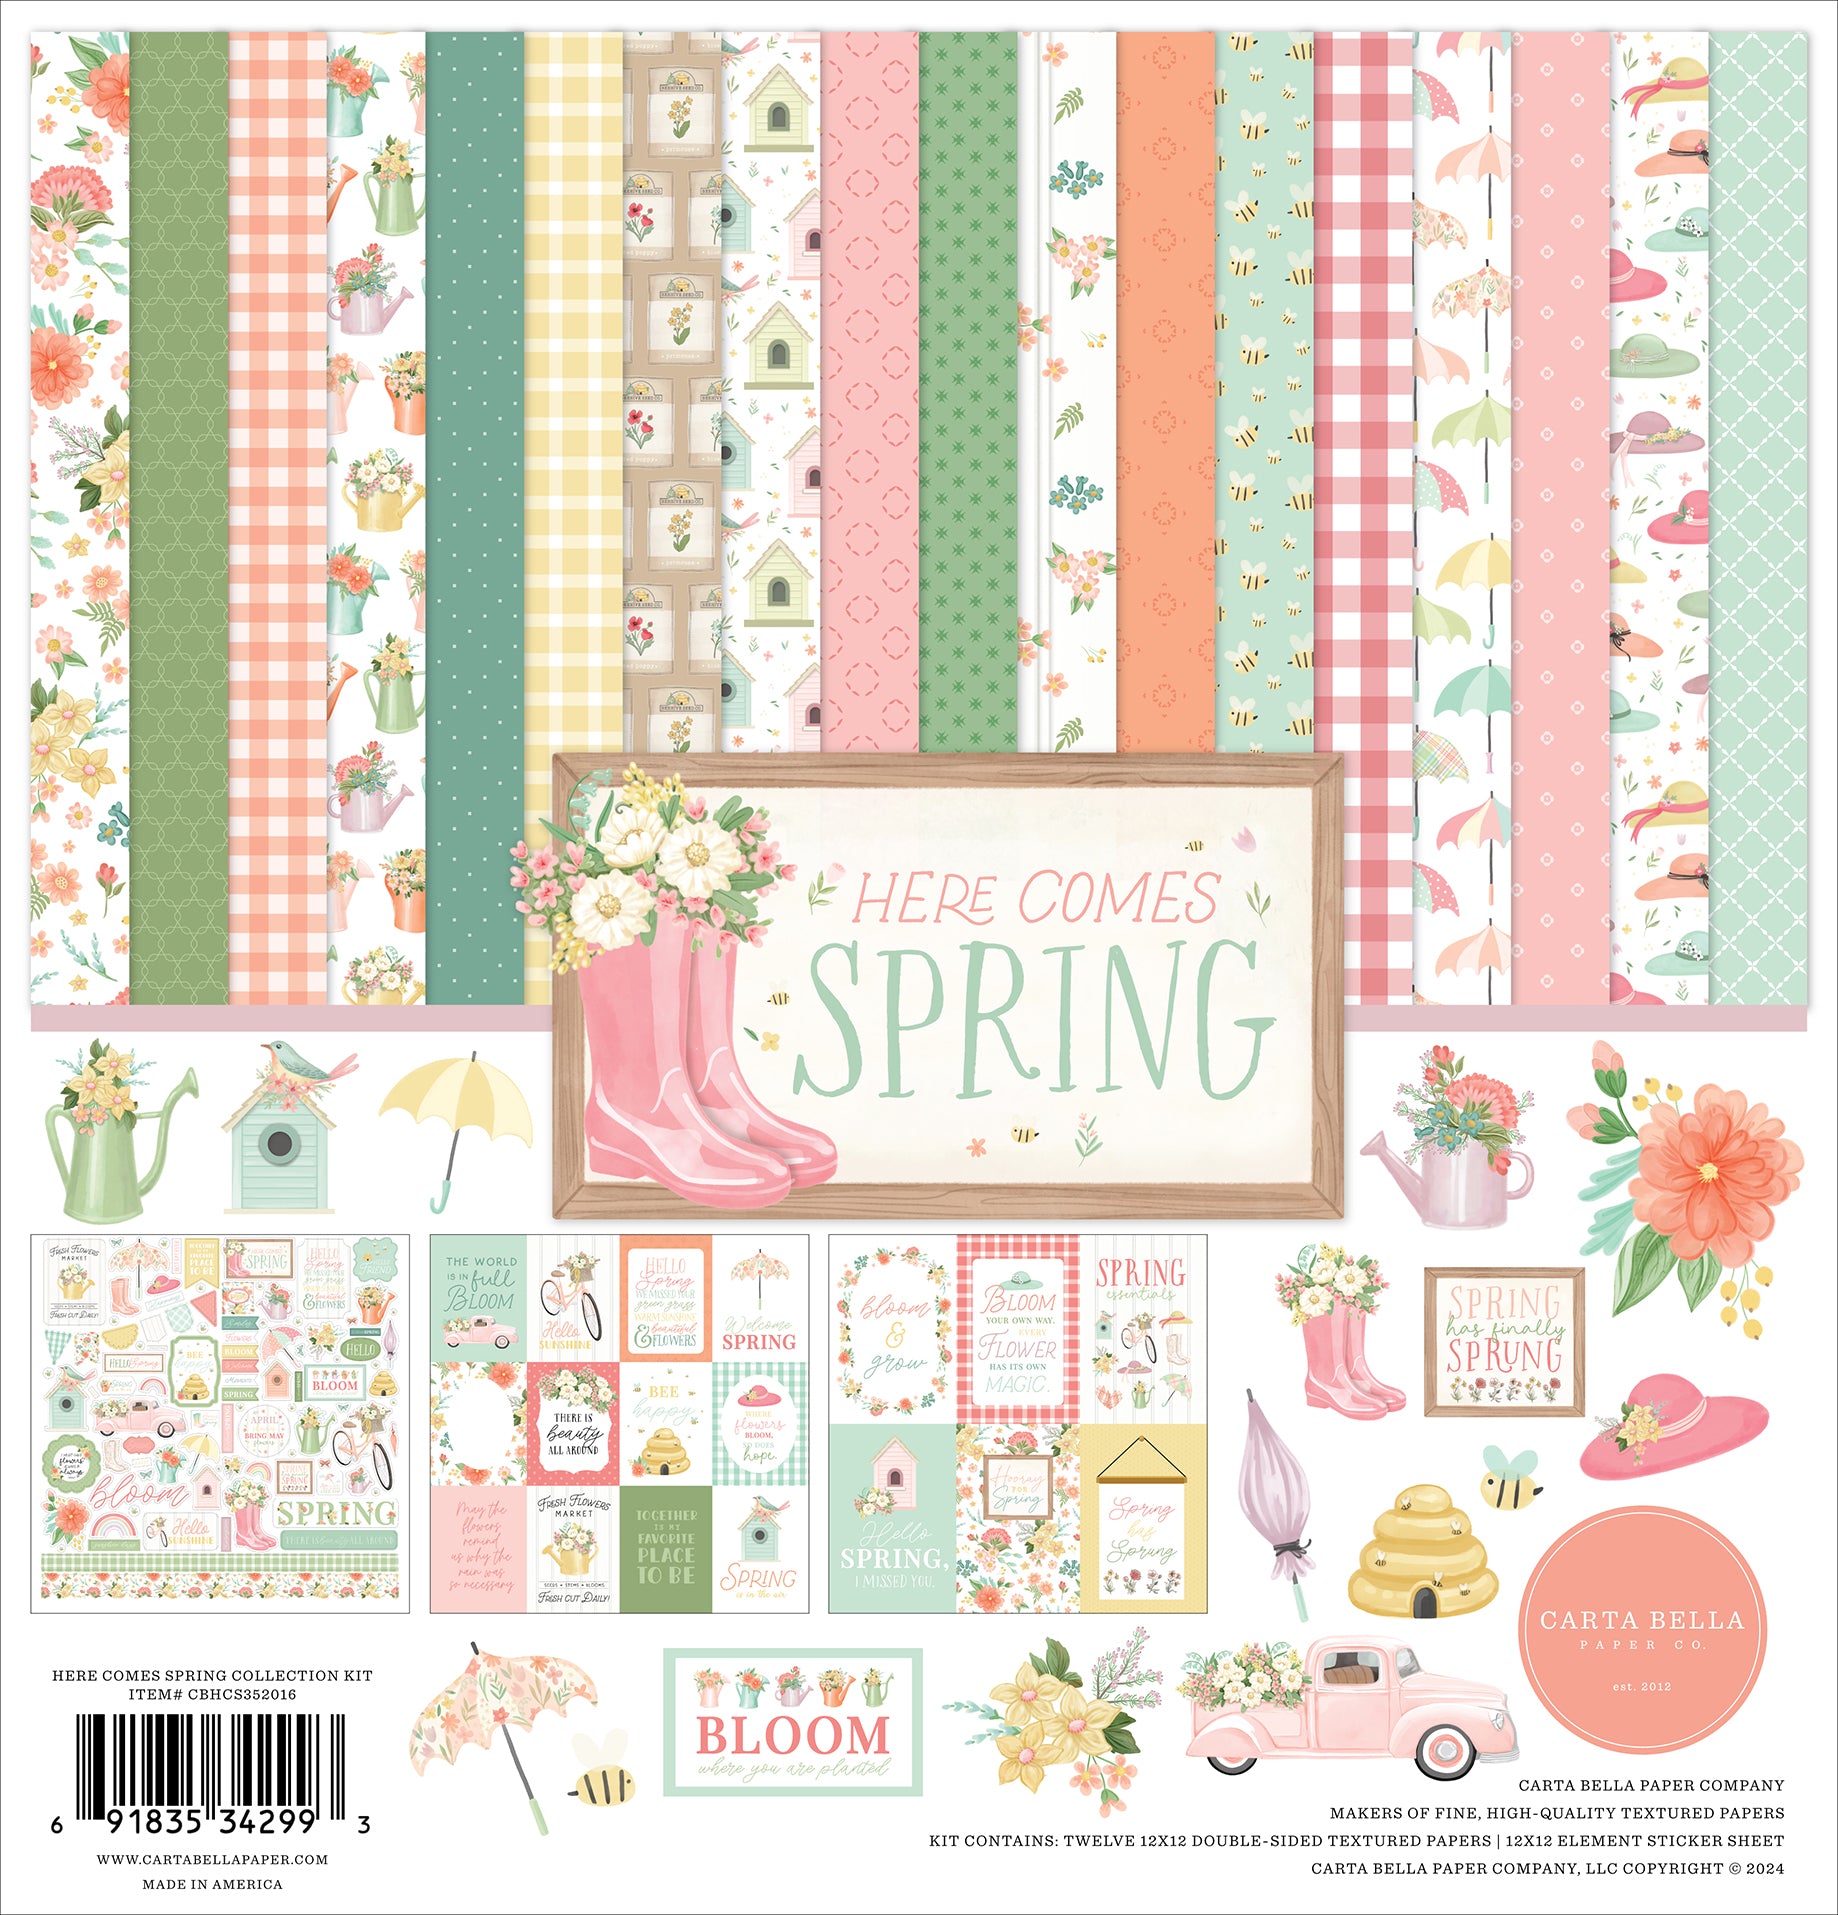 Here Comes Spring 12 x 12 Scrapbook Collection Kit by Carta Bella